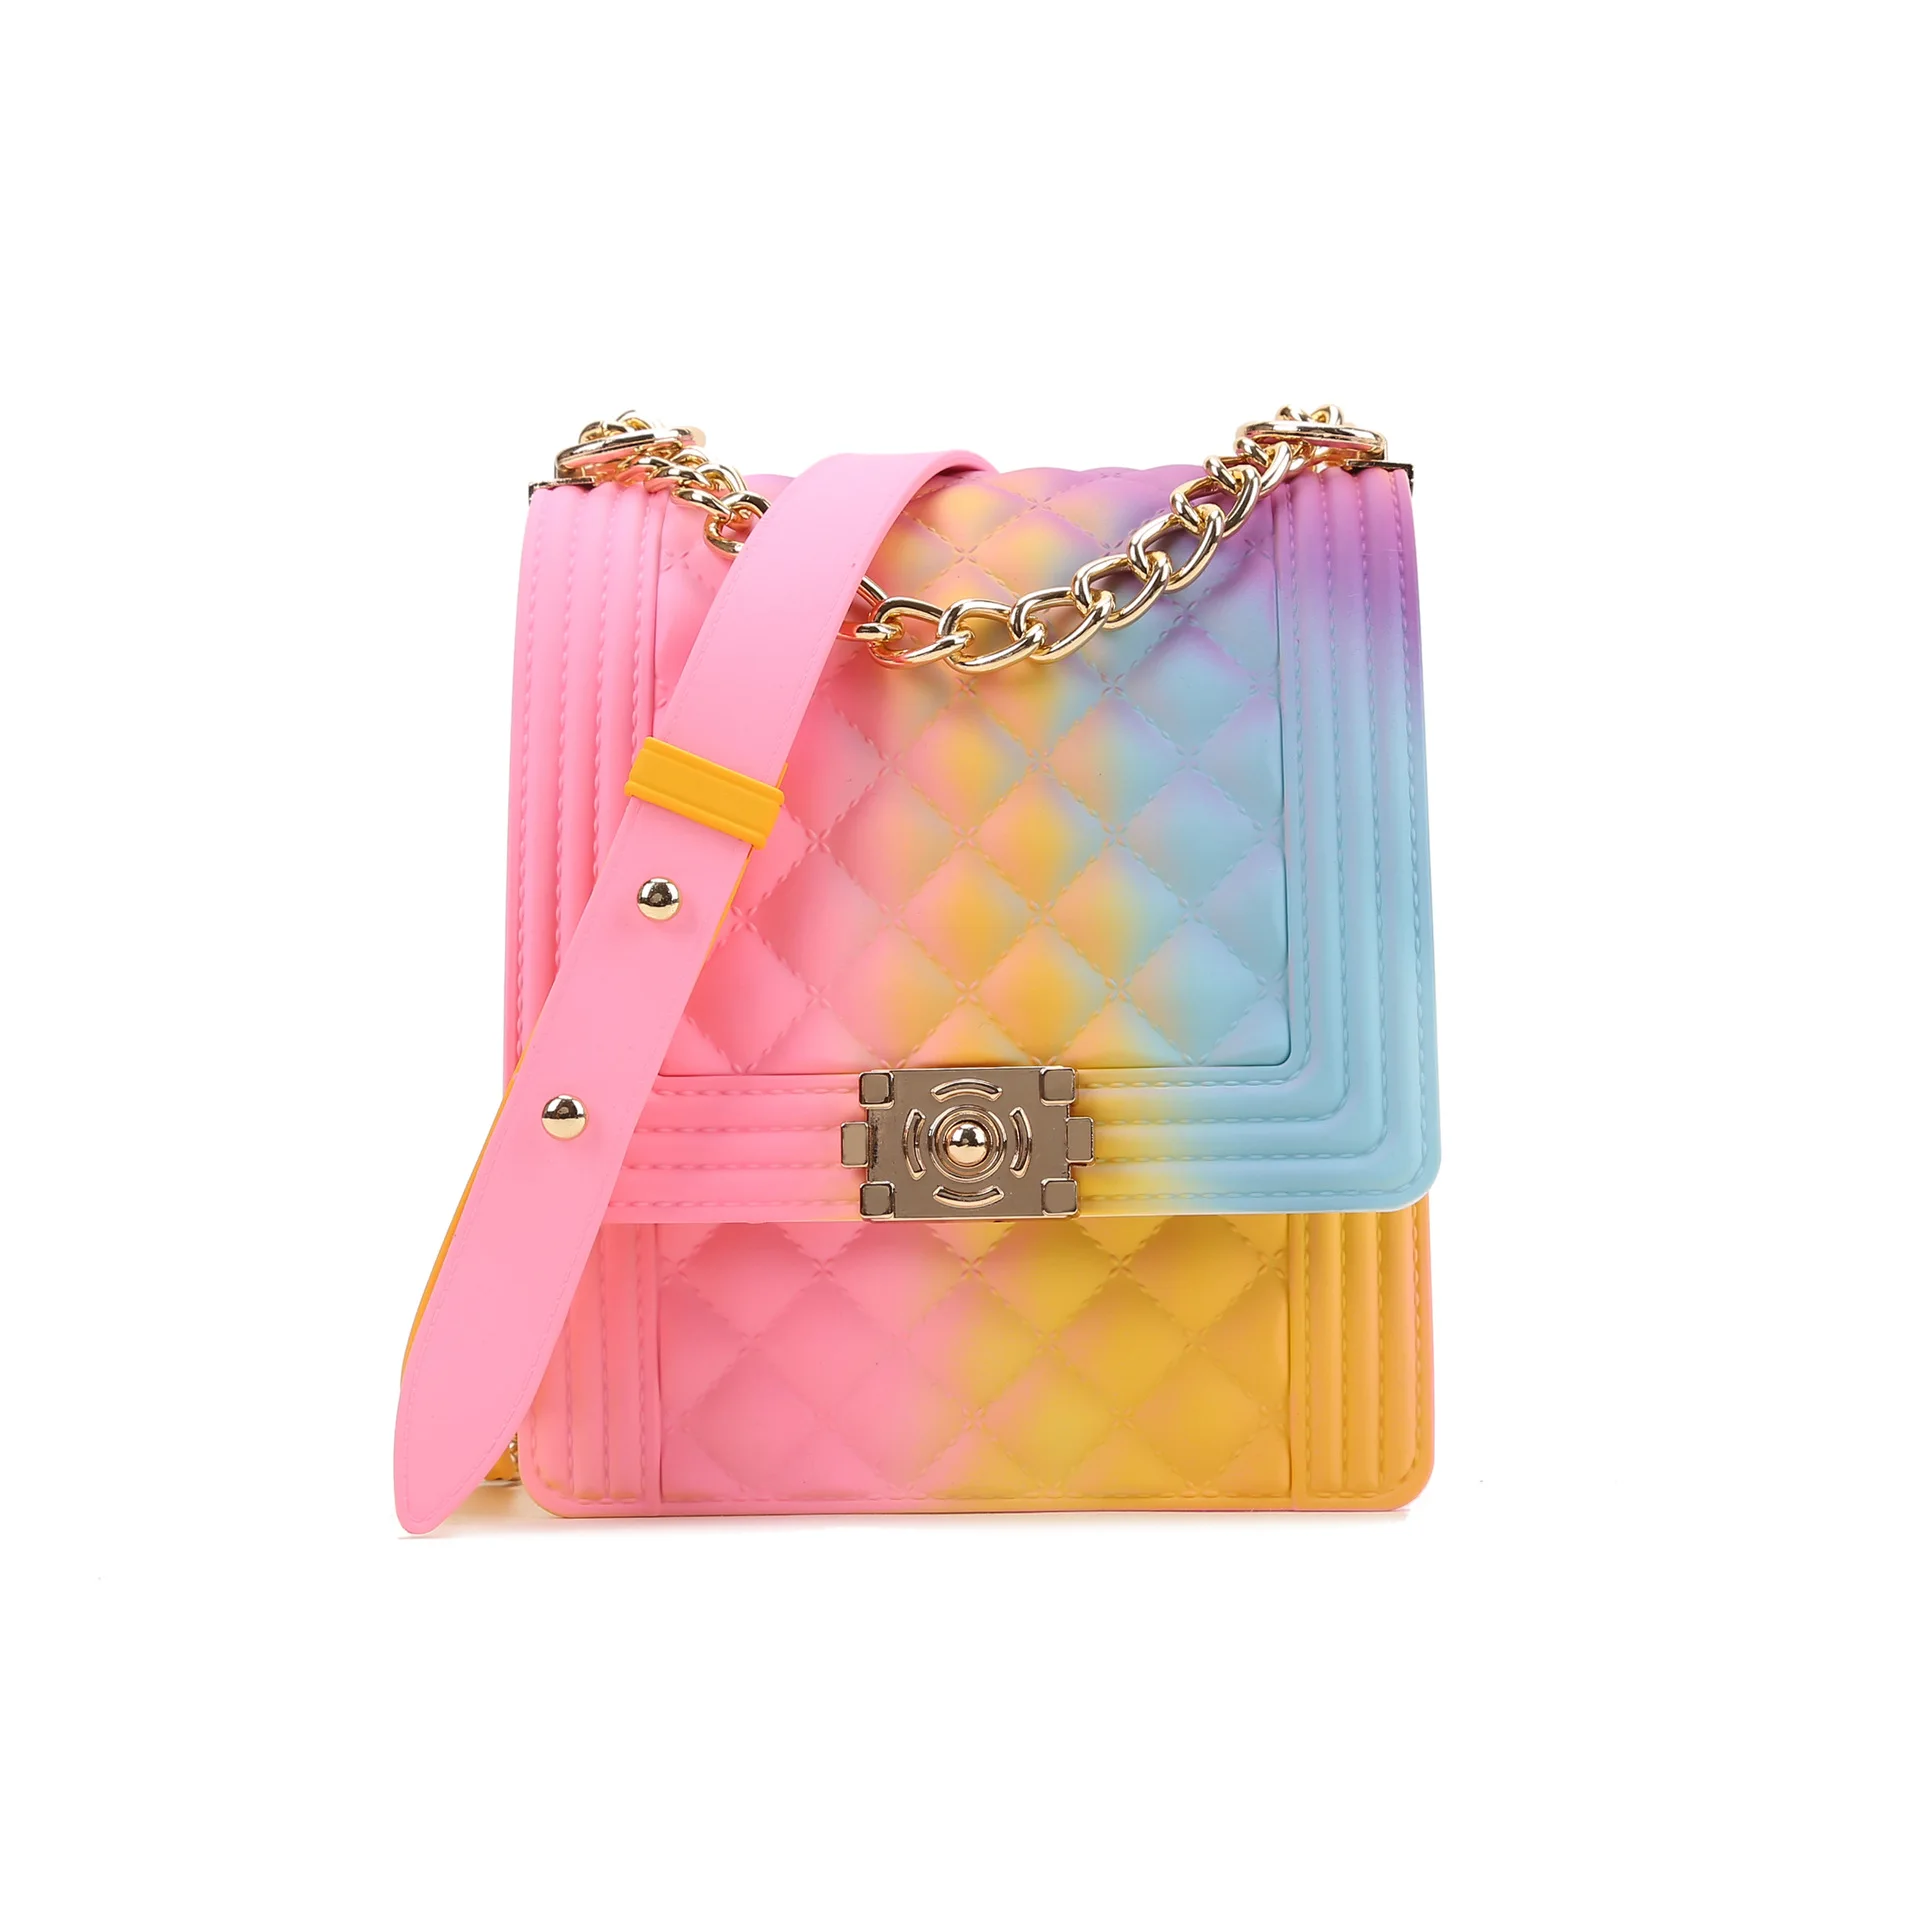 Rainbow Jelly Purse, High Imitation Pearl Tote Bag,Mini Colorful Matte  Crossbody Bag, Fashion PVC Handbag for Children, Colorful J: Buy Online at  Best Price in Egypt - Souq is now Amazon.eg